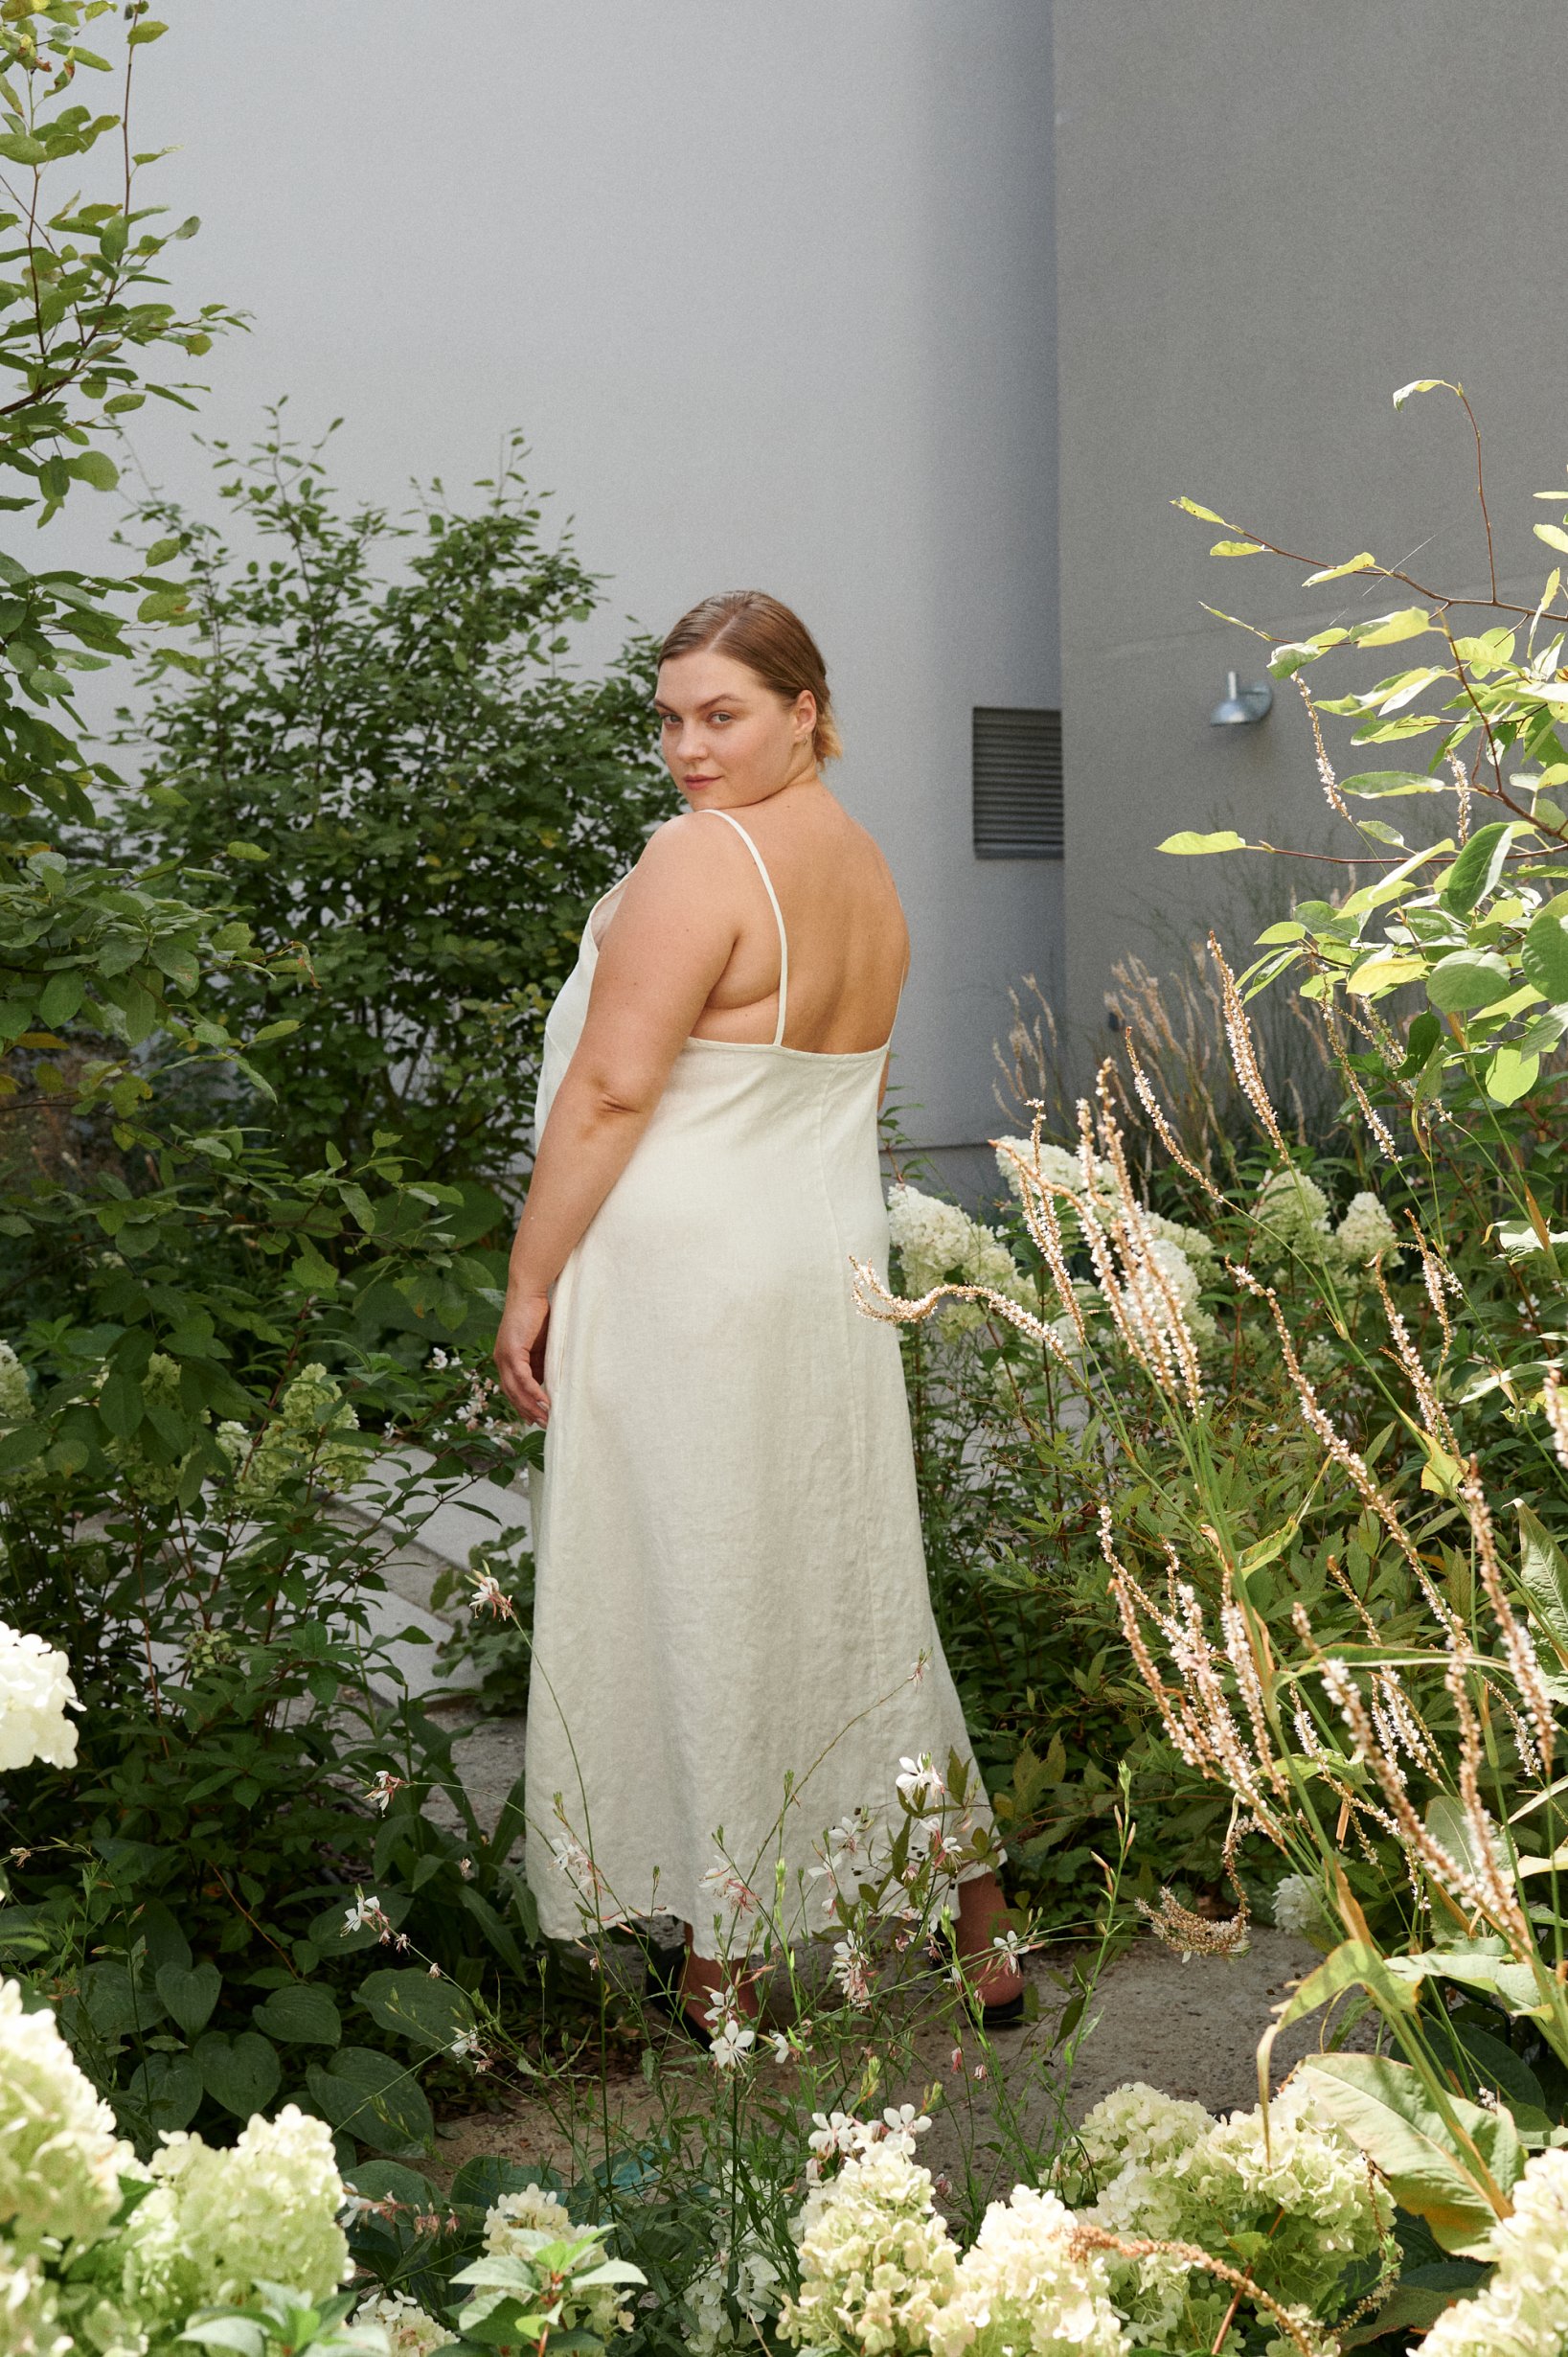 A milky white lightweight maxi linen dress with spaghetti straps and low-cut back